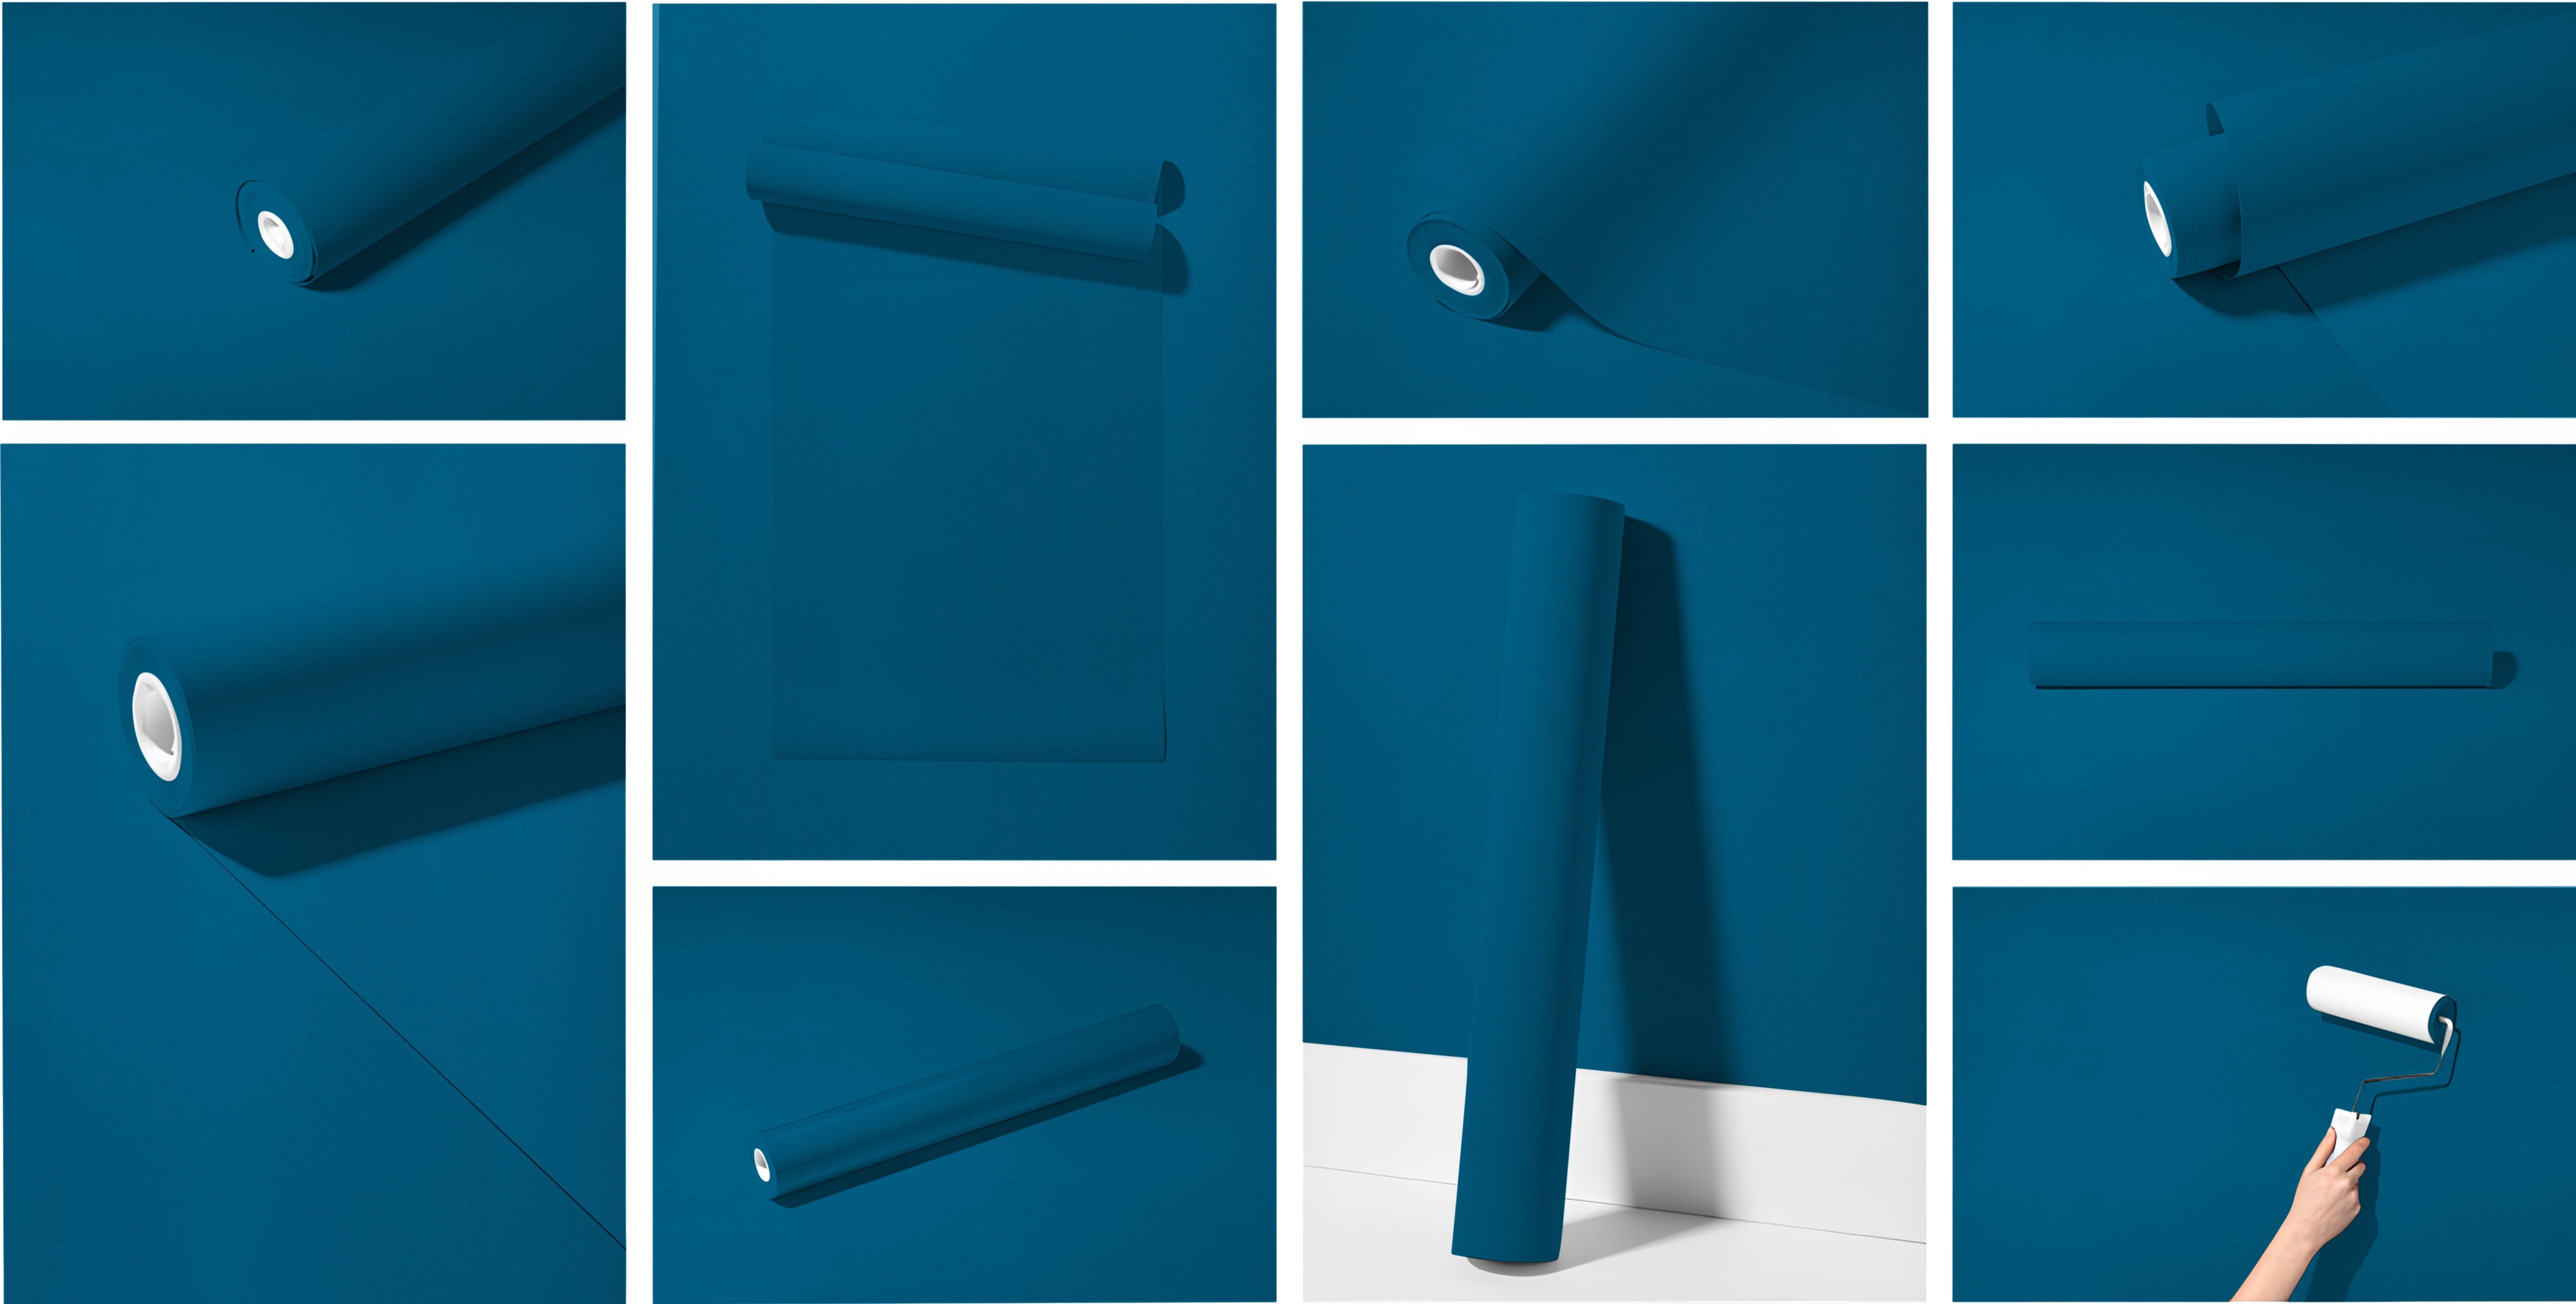 Peel & Stick Removable Re-usable Paint - Color RAL 5019 Capri Blue - offRAL™ - RALRAW LLC, USA